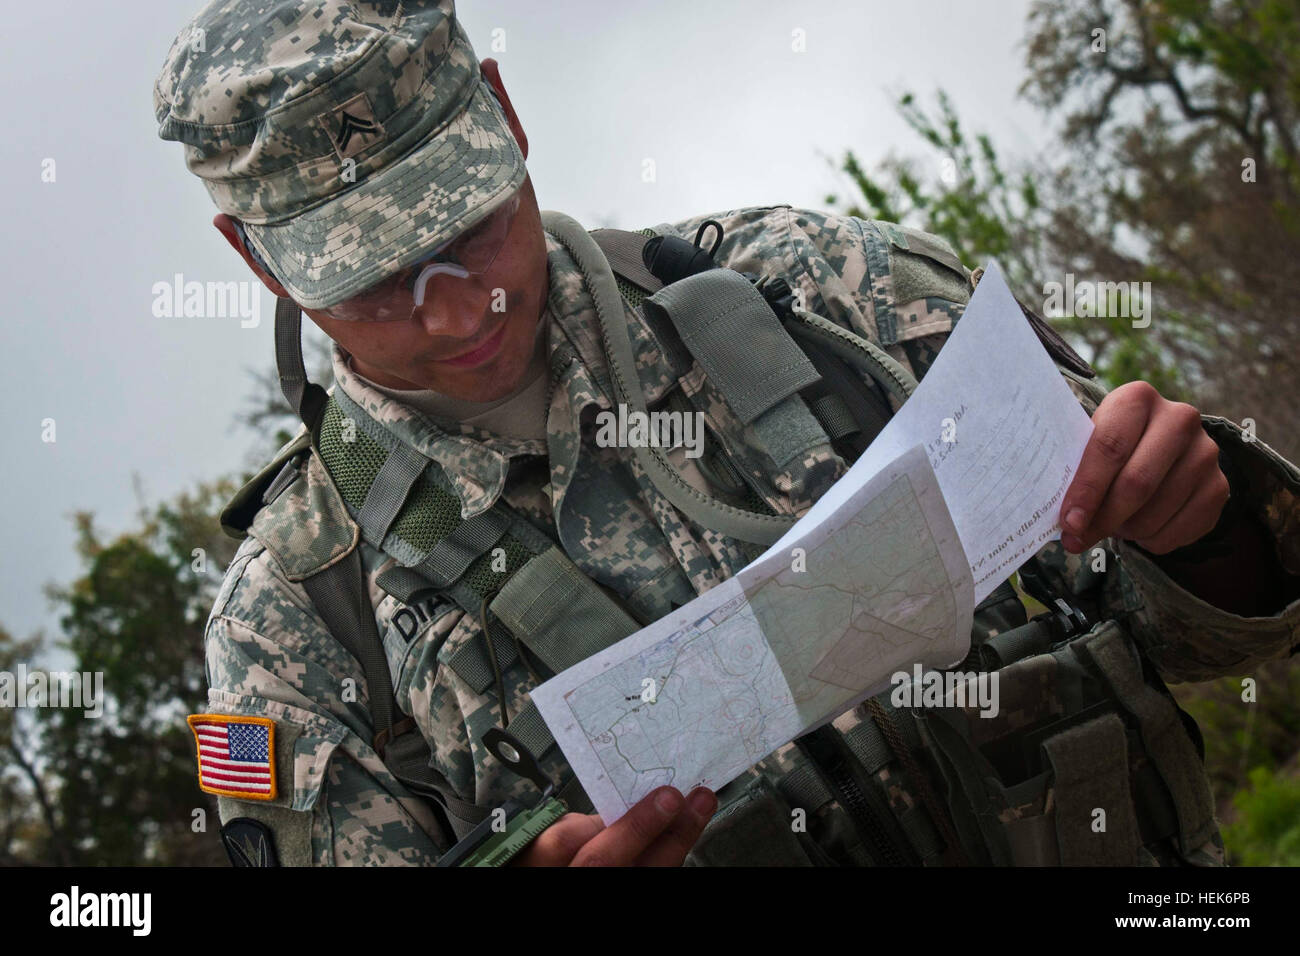 Spc. Jorge Diaz, 402nd Civil Affairs Bn., checks his map during the land navigation portion of the 350th Civil Affairs Command best warrior competition at Camp Bullis, Texas on March 24, 2012. (U.S. Army photo by Staff Sgt. Felix R. Fimbres) 350th CACOM battles it out by the Alamo 120324-A-CK868-979 Stock Photo